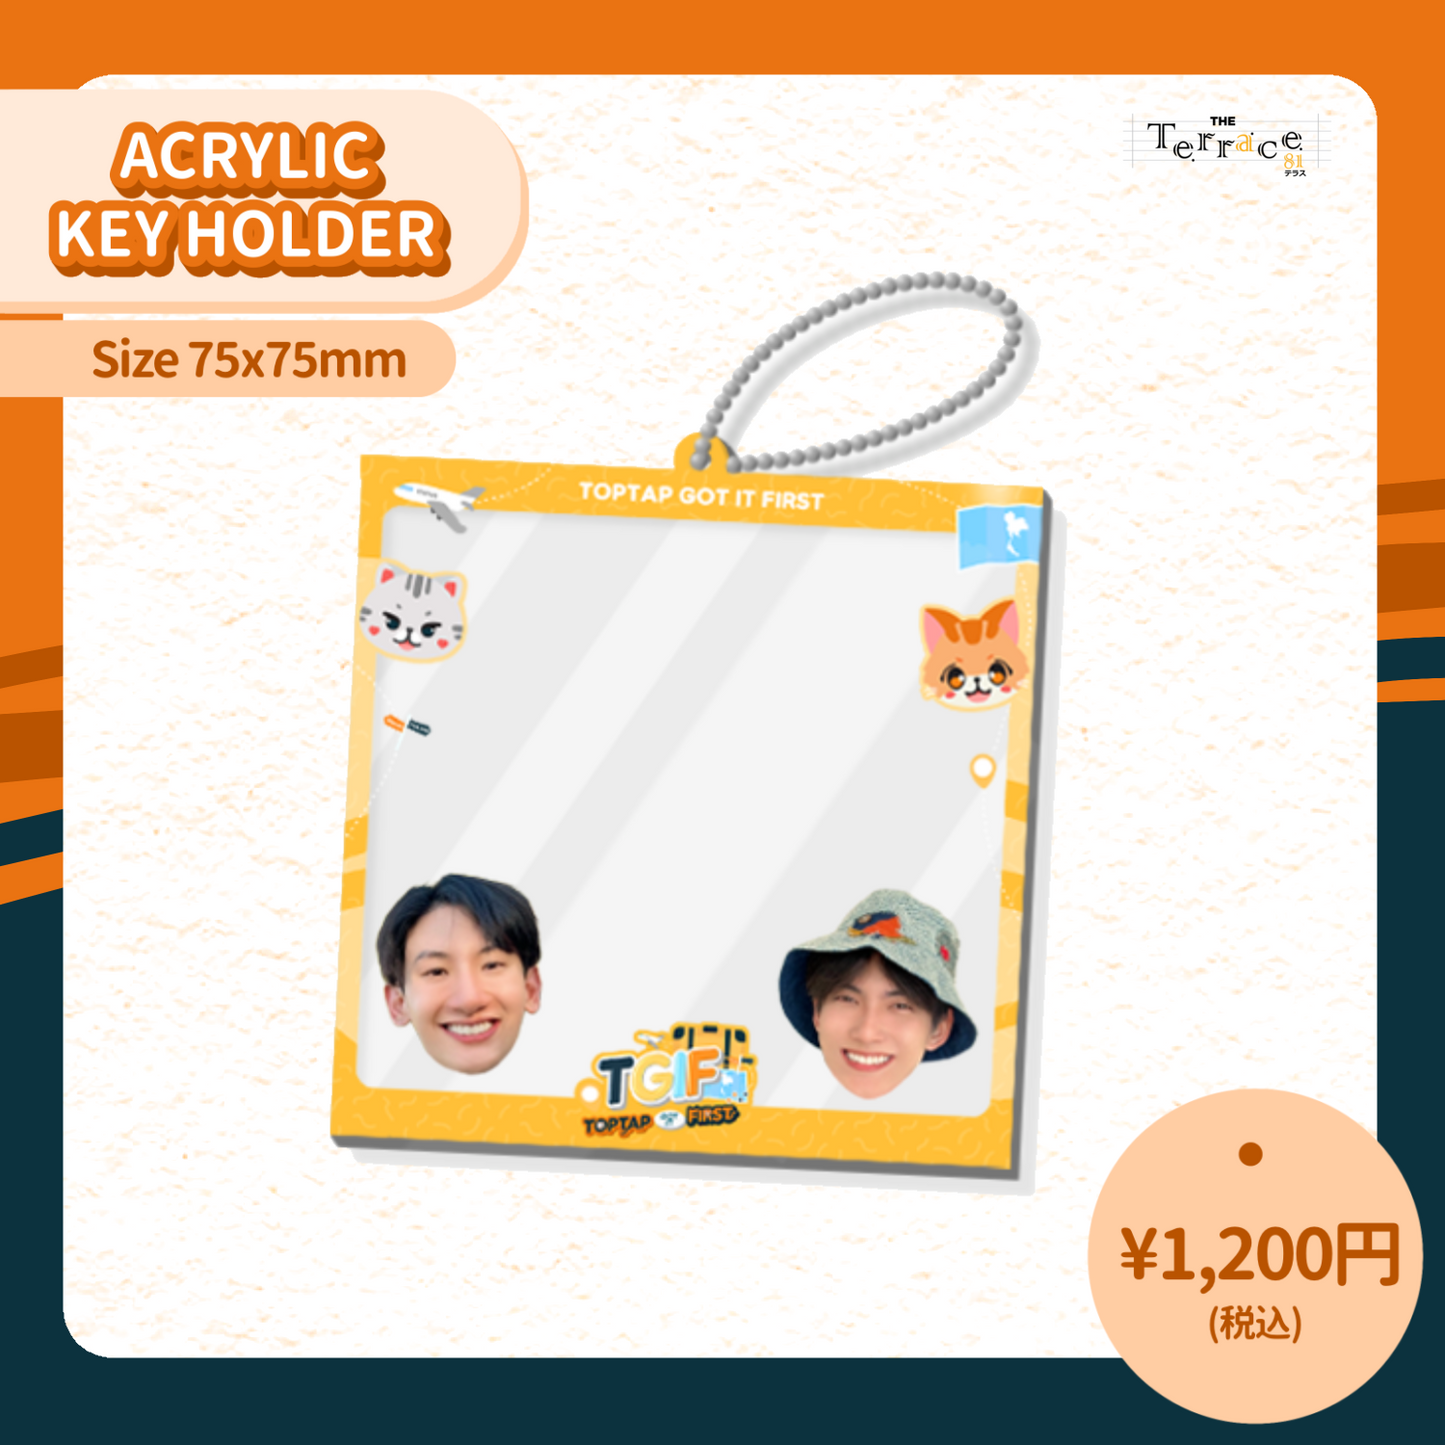 Acrylic Keyholder 1 (First and Toptap Ver.)